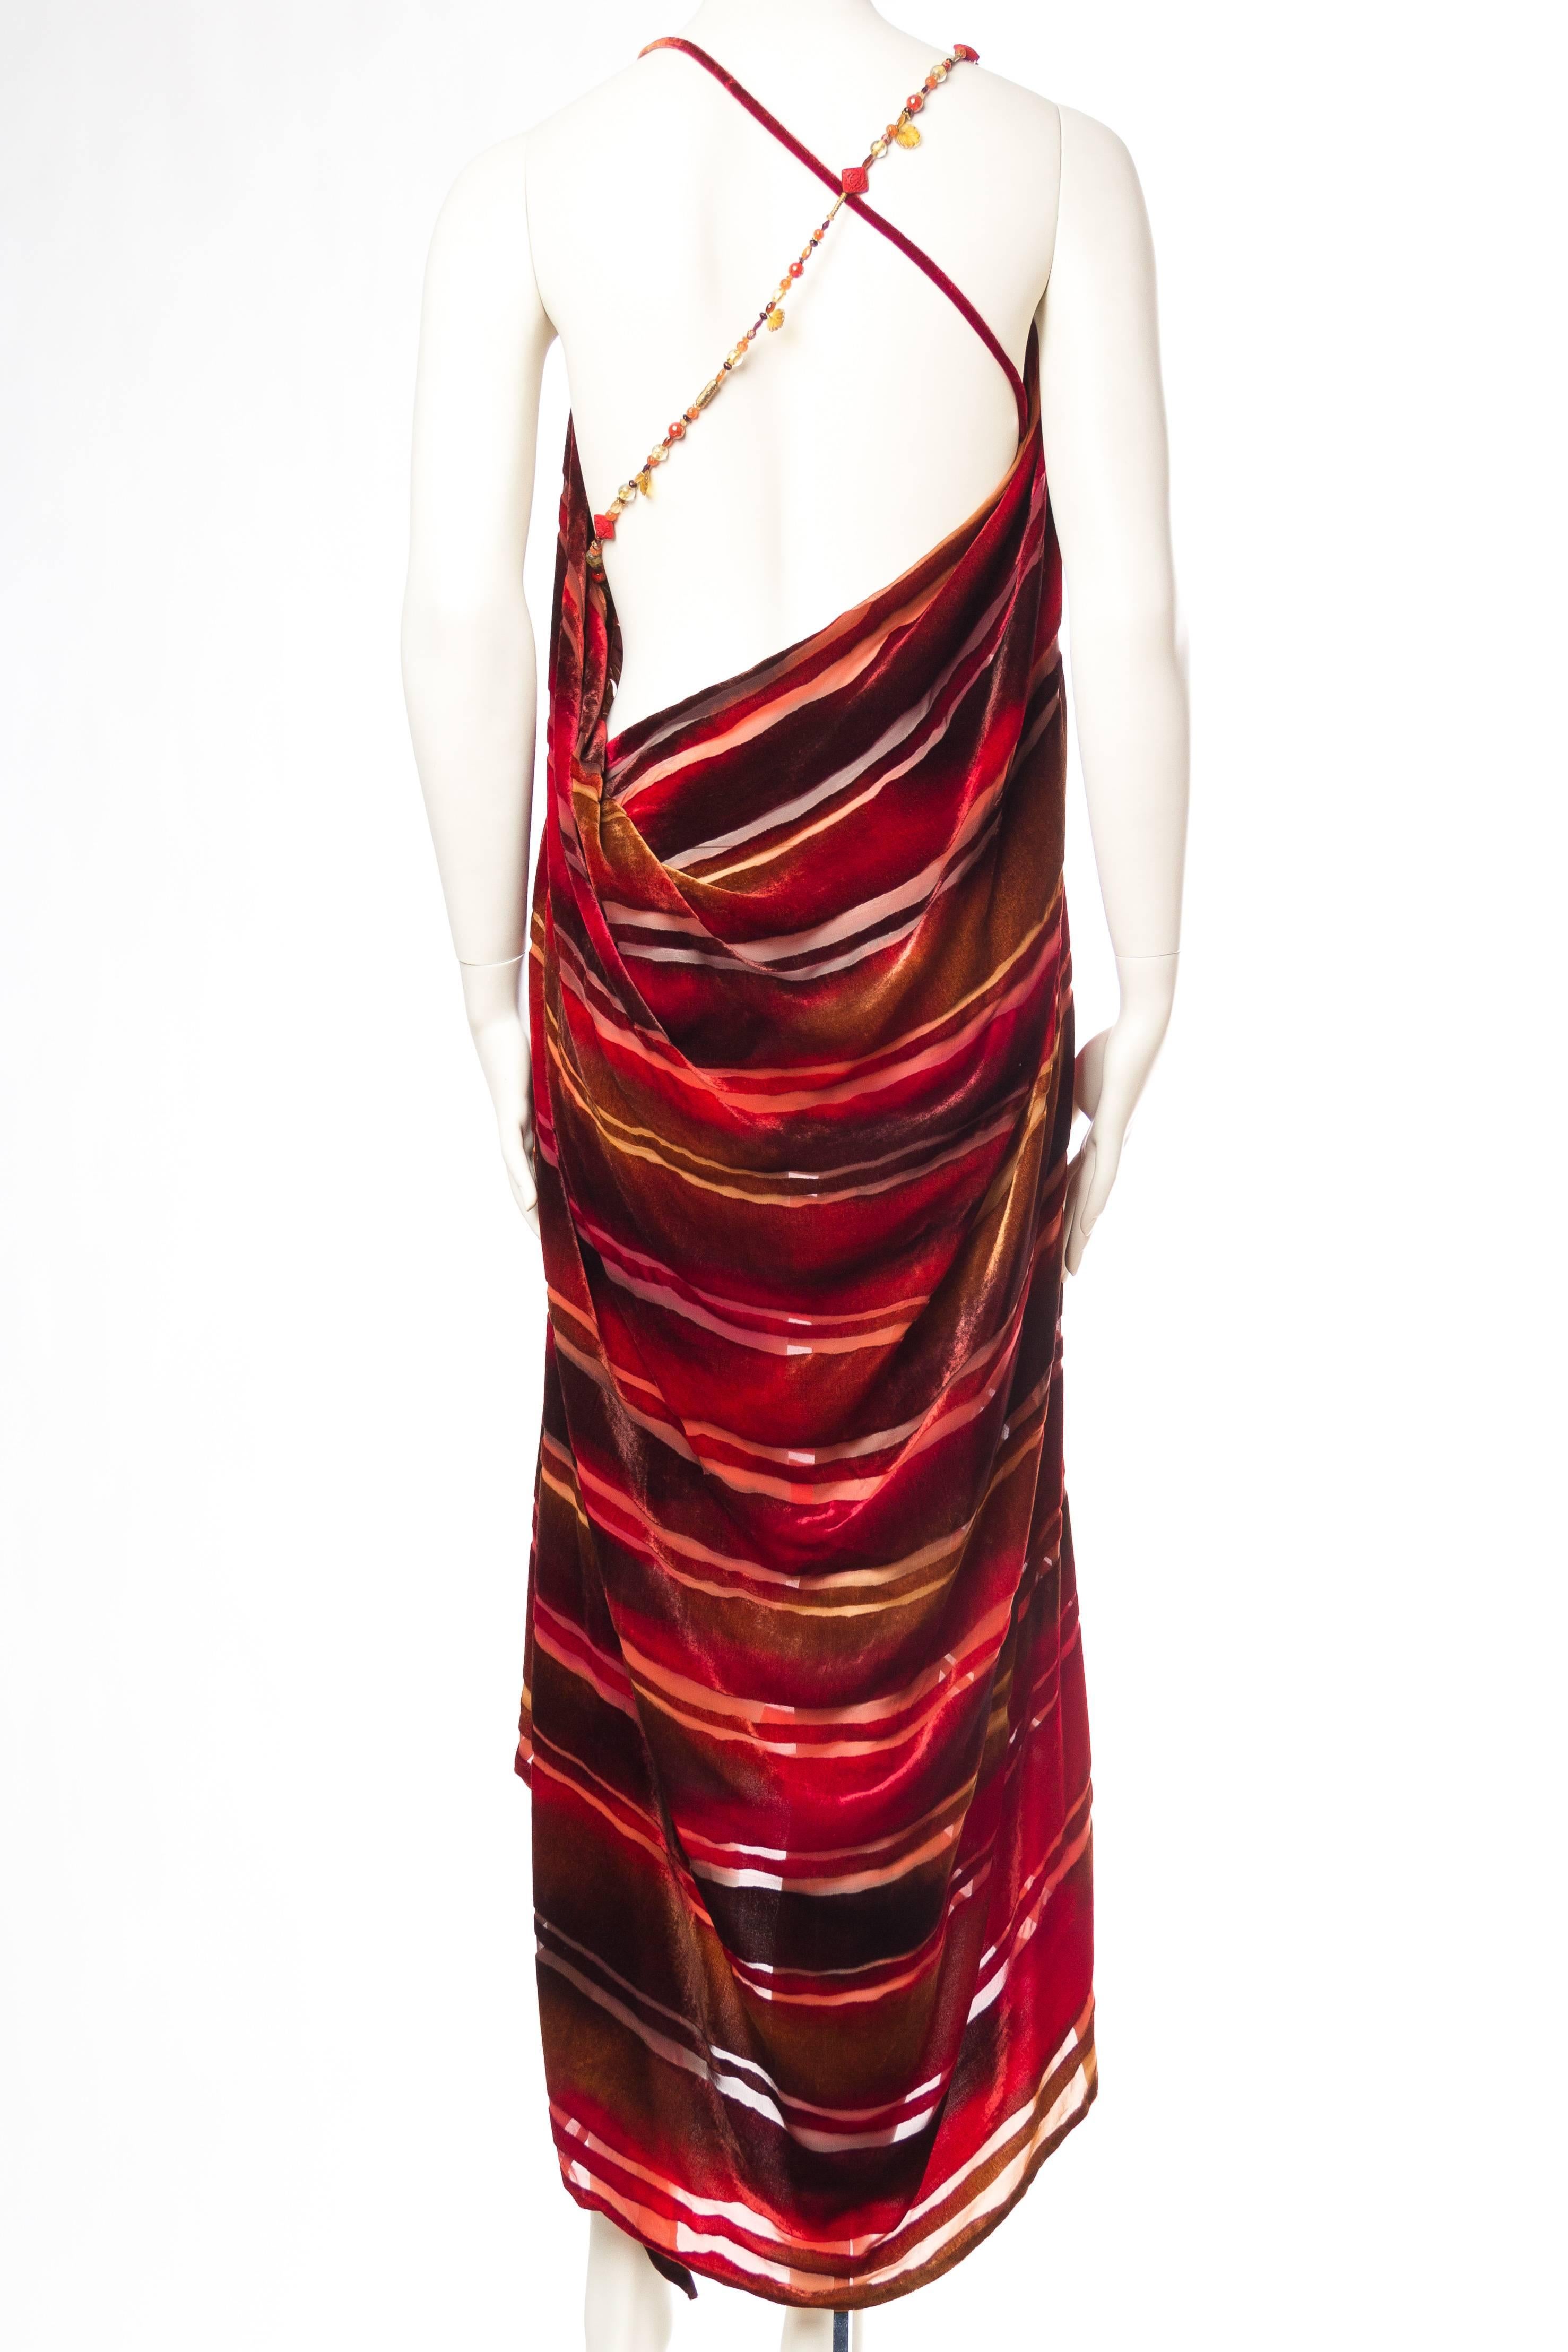 Women's 1990s Backless Hand Painted Silk Velvet Dress with Gold Beads